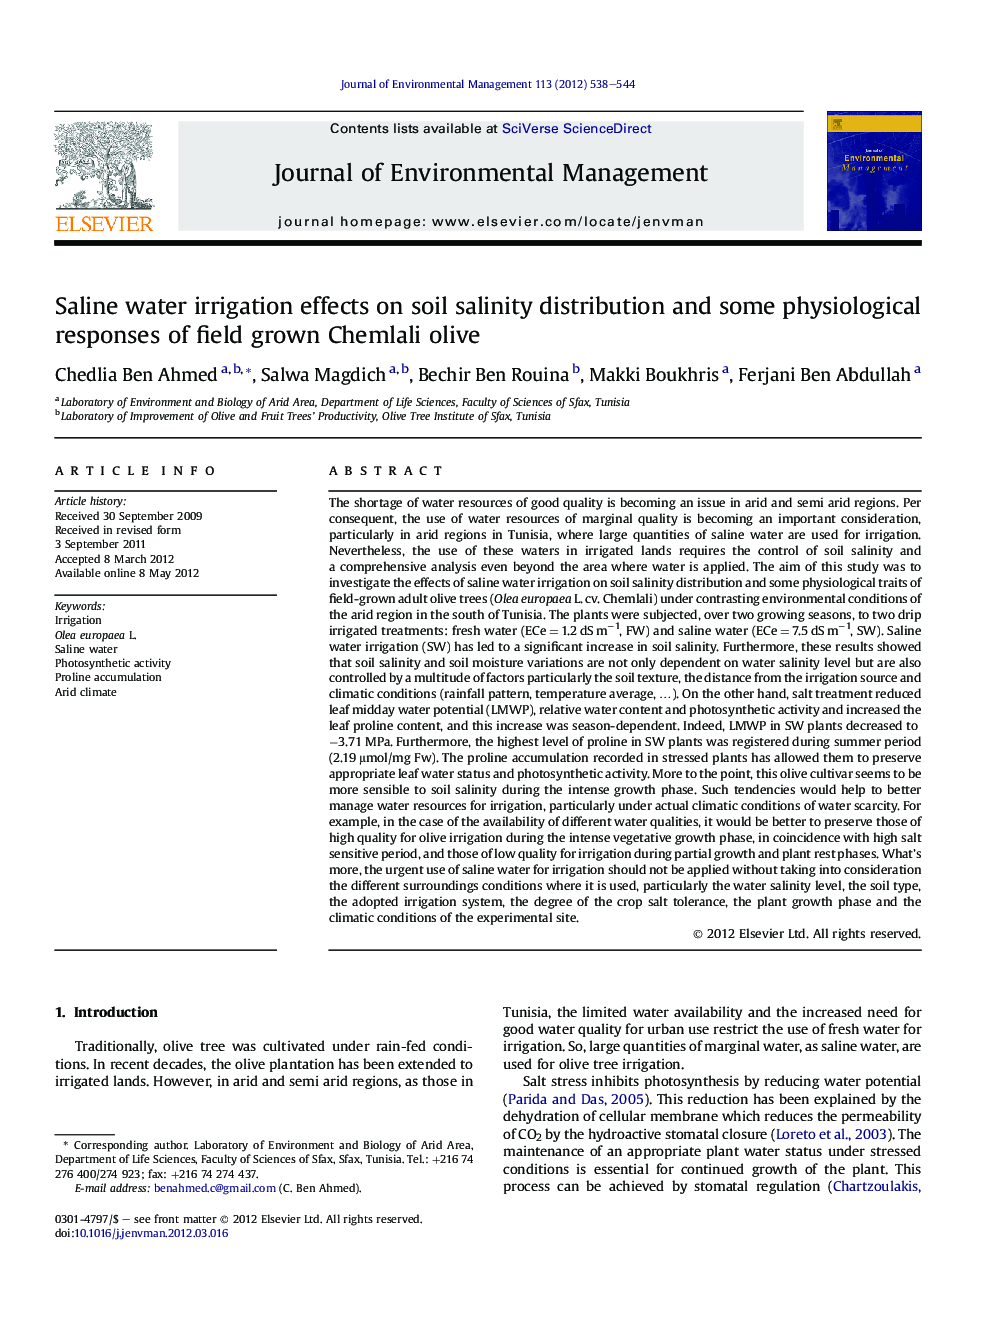 Saline water irrigation effects on soil salinity distribution and some physiological responses of field grown Chemlali olive